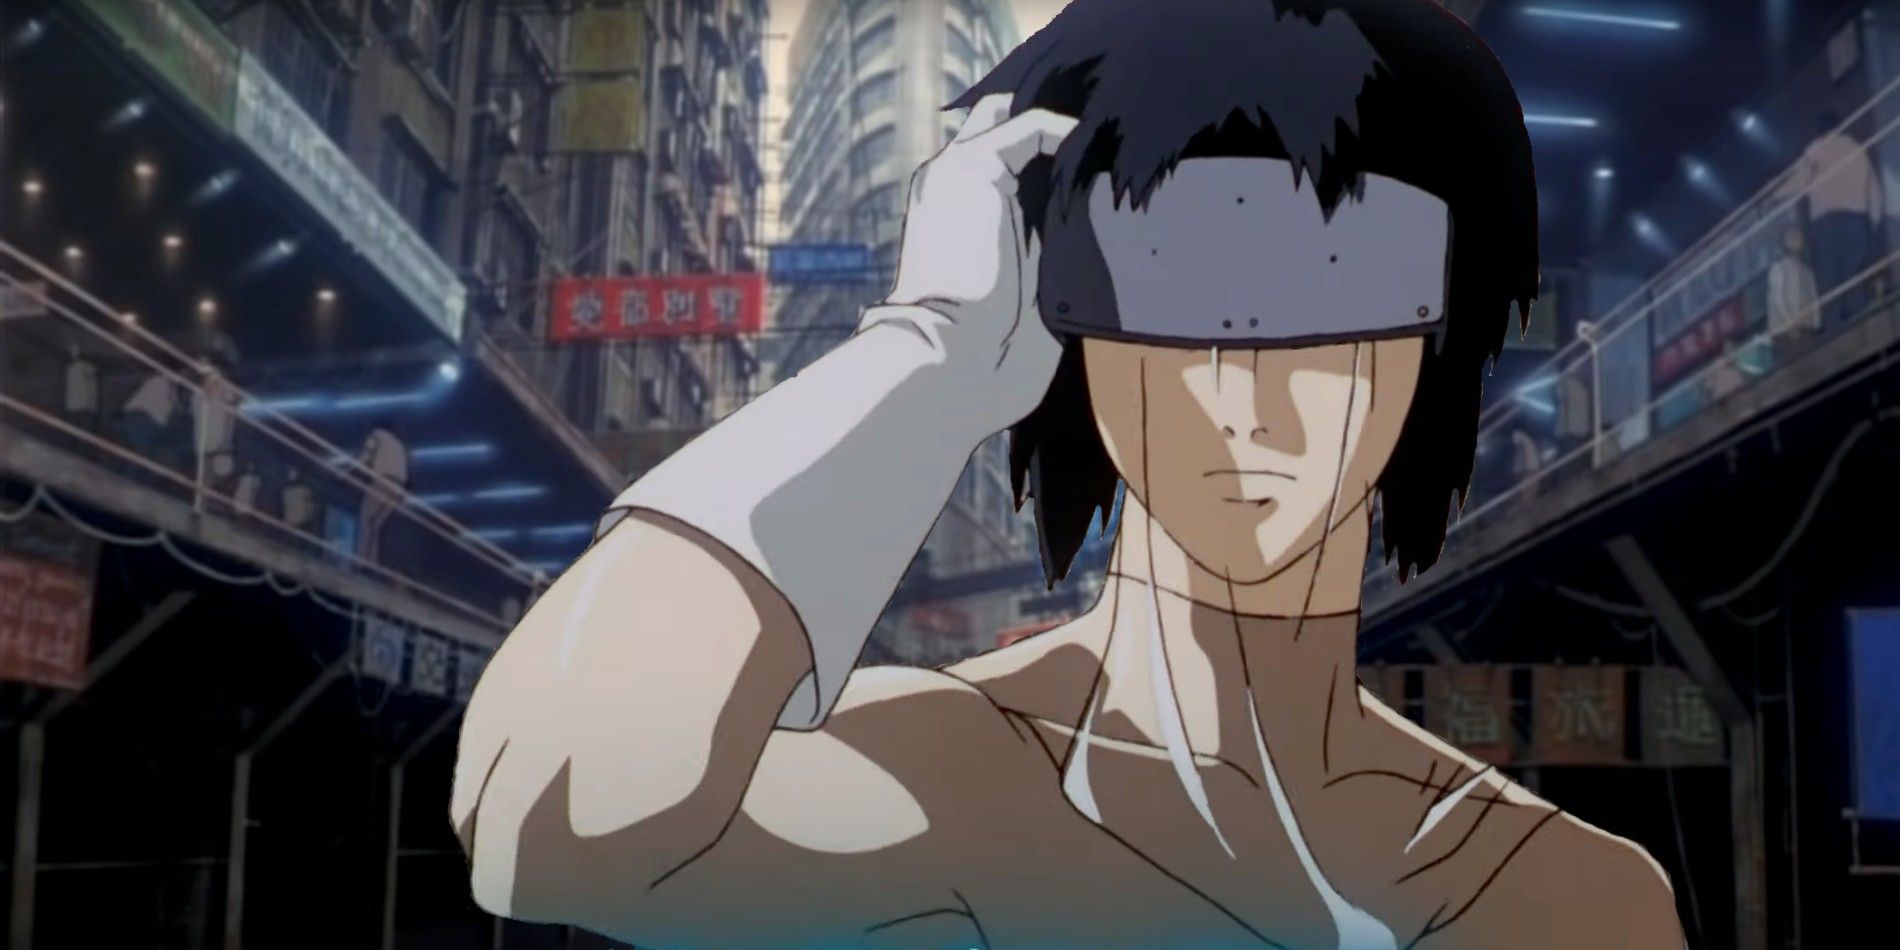 Major Motoko Kusanagi stands in a street holding a mask over her eyes in Ghost in the Shell.